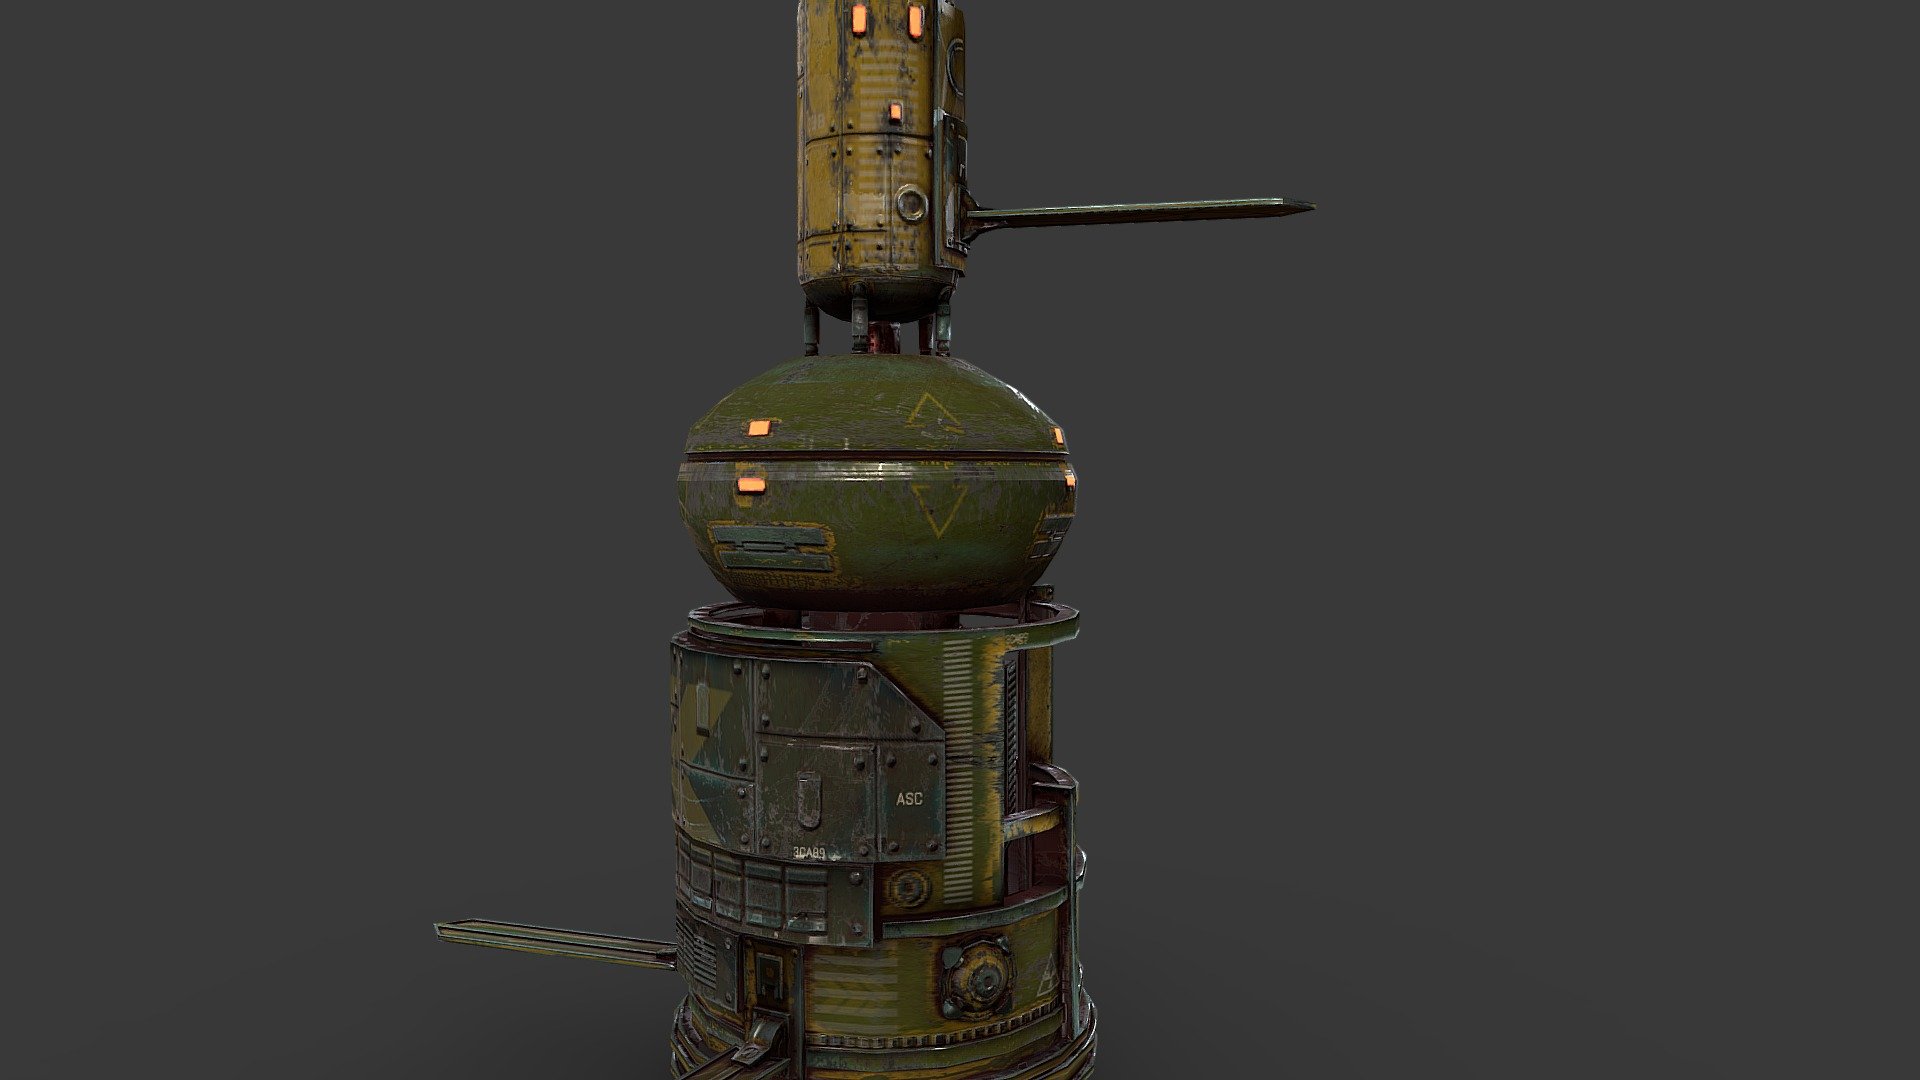 This is a 3d model of Sci Fi Satellite.
This is realistic 3d model.
This model is made using Autodesk 3DS Max 2021.
All the previews are rendered using Iray Renderer.
This is midpoly model and ready to use for game engine.
PBR textures are used in 2048x2048 resolutions.
All the textures and 3ds max files are attached with this.
Polys:       7,351
Vertices:  8,263
This 3d model is available in 5 formats
1. Max
2. Dae
3. Obj &amp; Mtl
4. Fbx
5. 3ds

All this files/formats can be import into any of your favorite software.

If you have any queries, feel free to contact me.

Portfolio Link: https://www.artstation.com/artwork/eayRw6

Thanks &amp; Regards,
Artist Swastika Bhadury - SciFi Satellite - Buy Royalty Free 3D model by swastika (@chinababa) 3d model